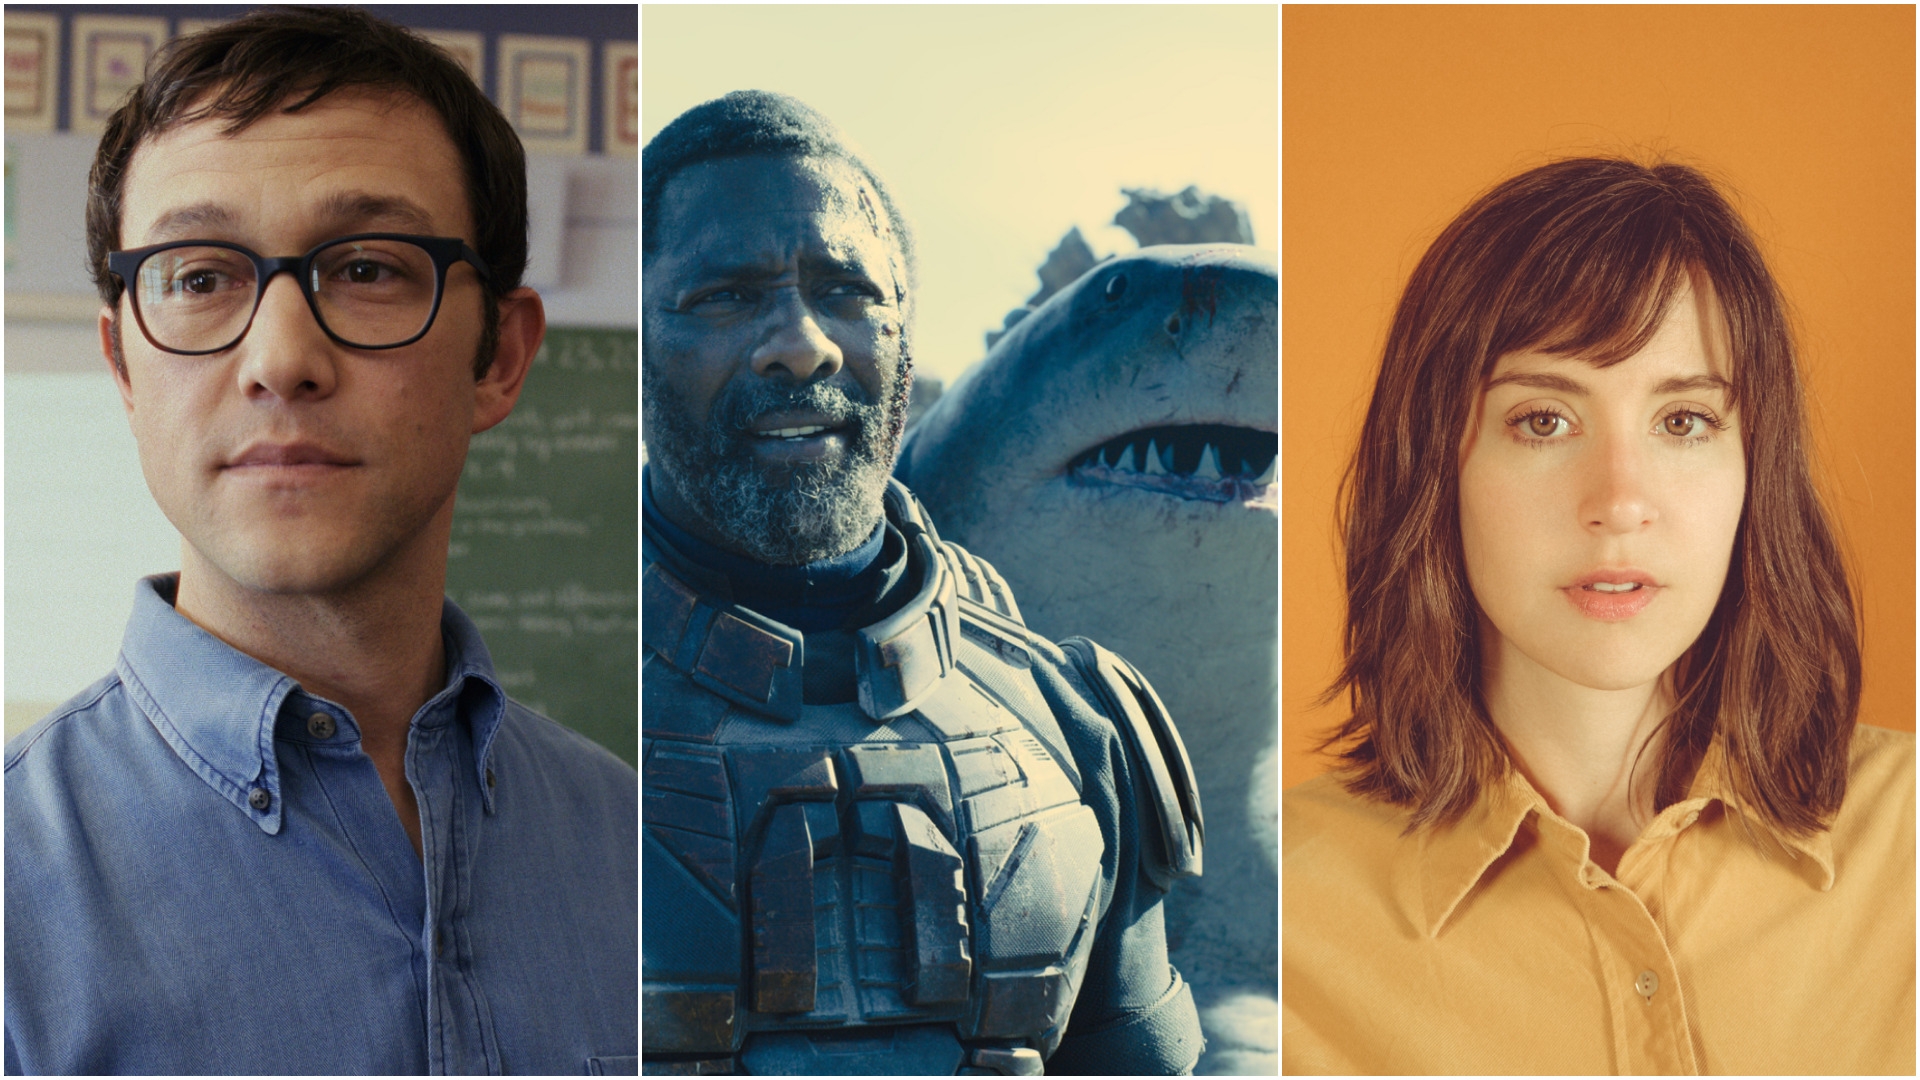 Your weekend assignments are The Suicide Squad, Joseph Gordon-Levitt, and Laura Stevenson